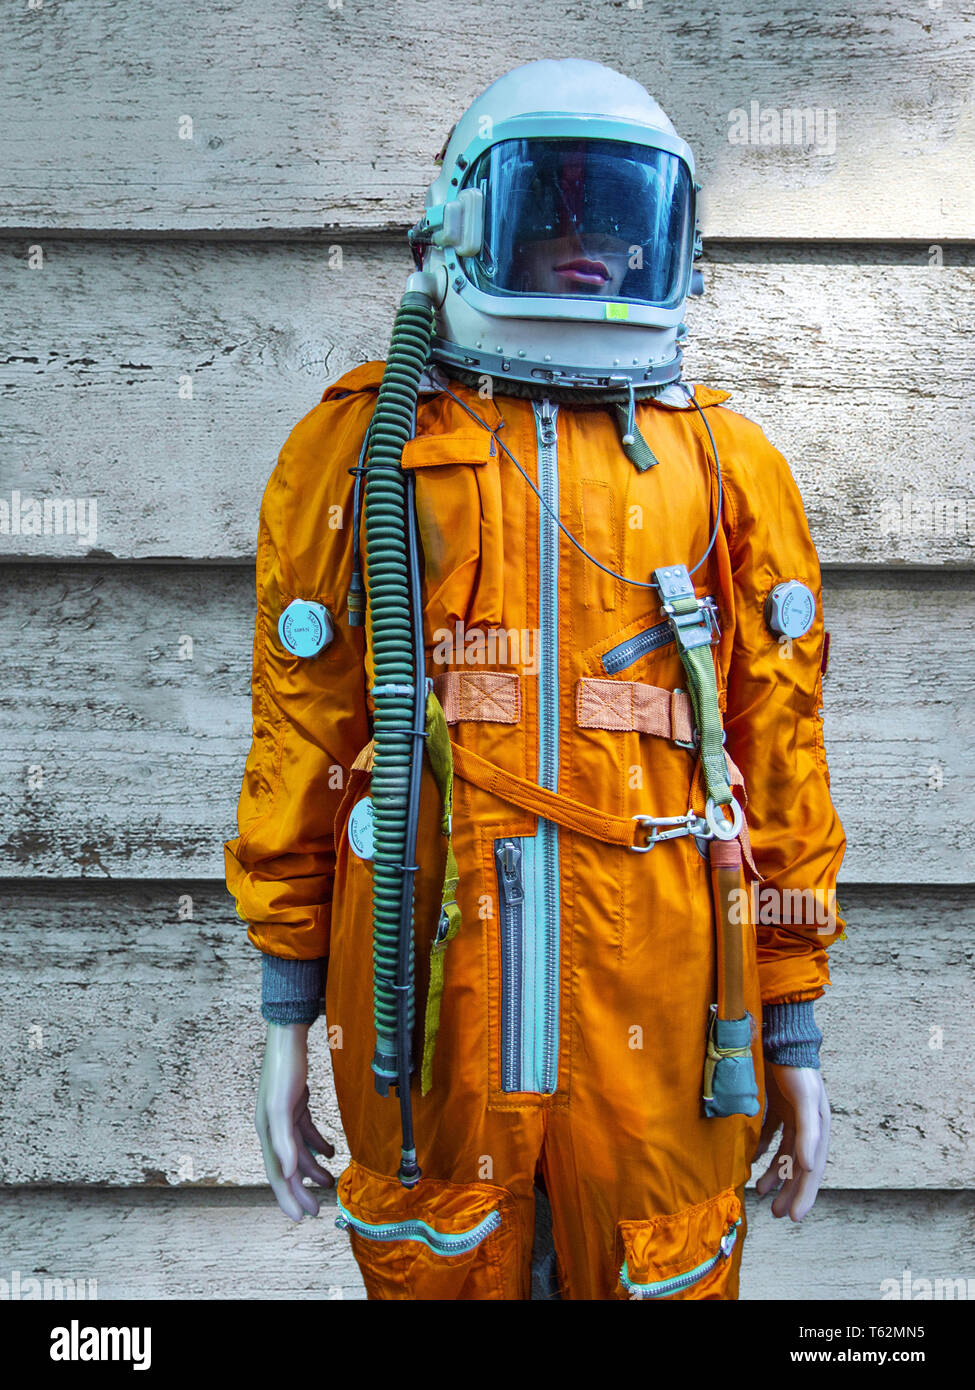 orange space suit worn by a mannequin Stock Photo: 244693265 - Alamy